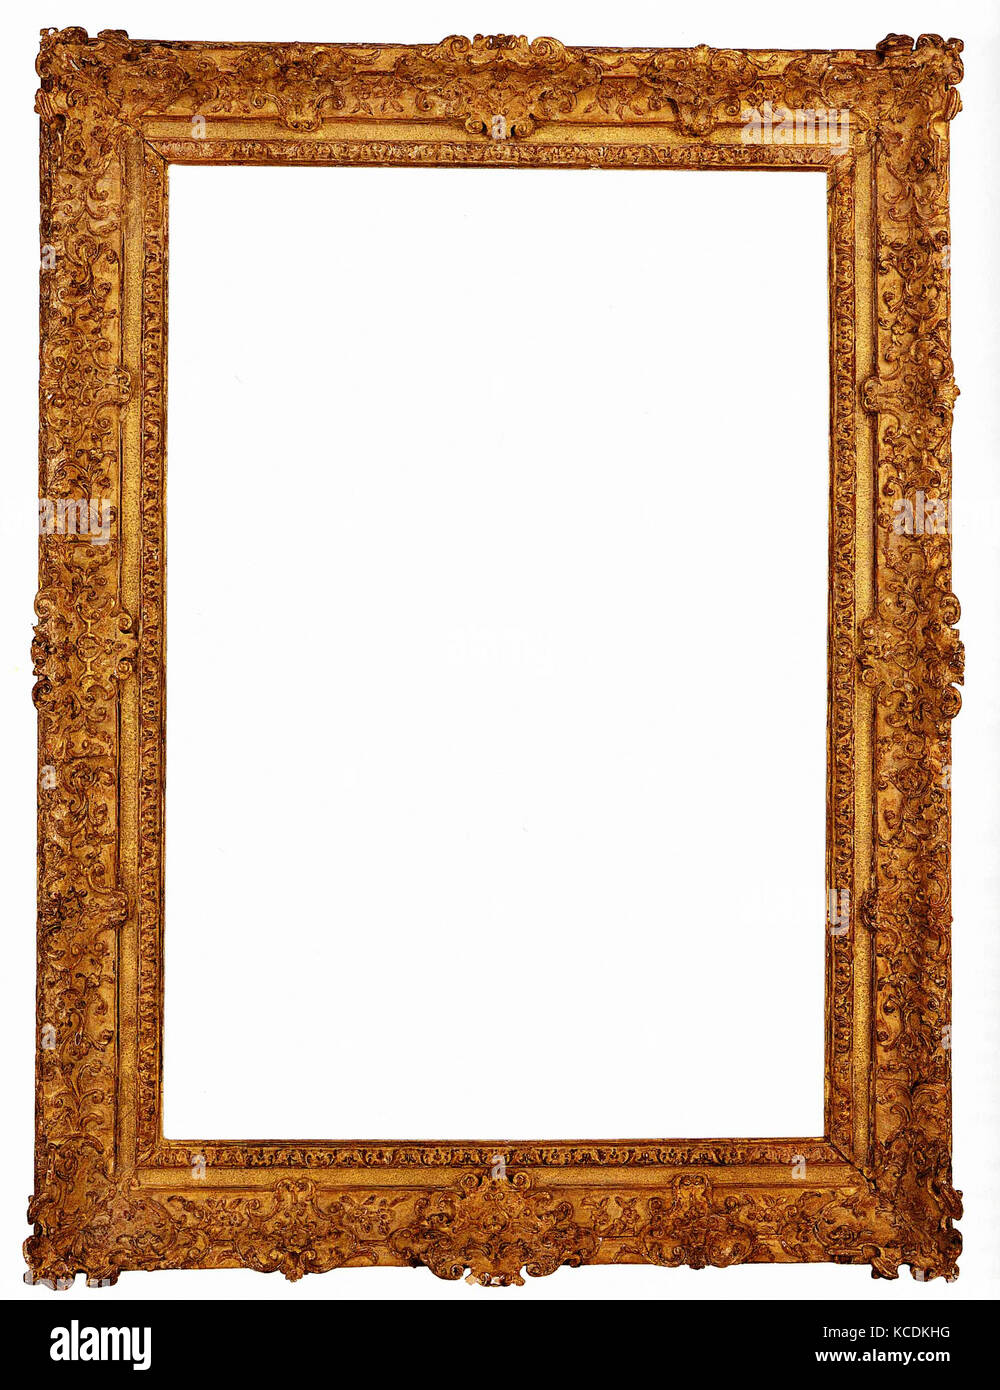 https://c8.alamy.com/comp/KCDKHG/ogee-frame-ca-1700-french-oak-carved-gilt-red-brown-bole-overall-131-KCDKHG.jpg